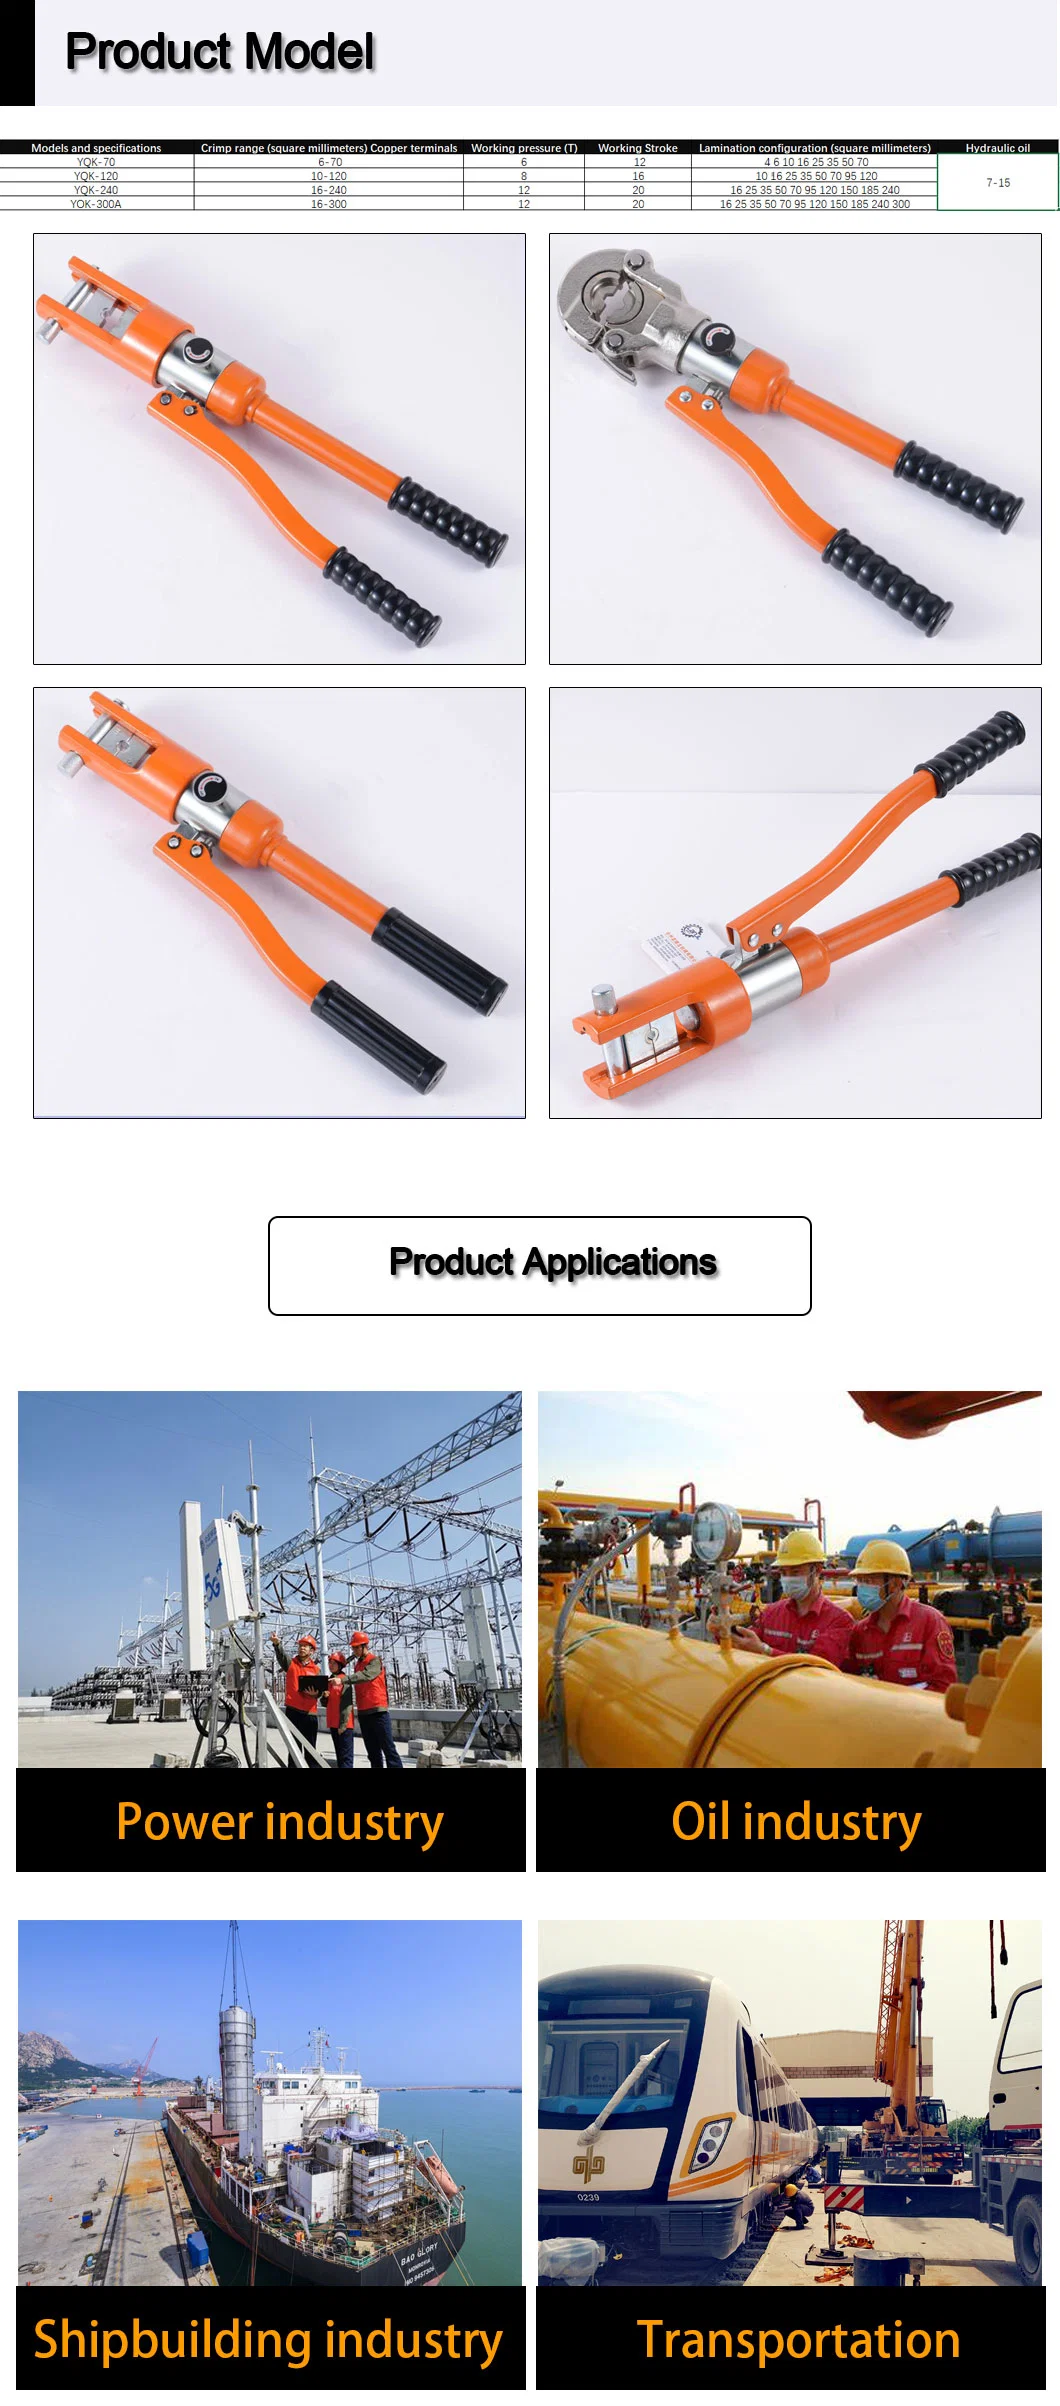 Hand Electric Hydraulic Pliers Copper and Aluminum Segments Manual Tool Cutting Combination Crimping Lineman Universal Wire Terminal Connectors Plier